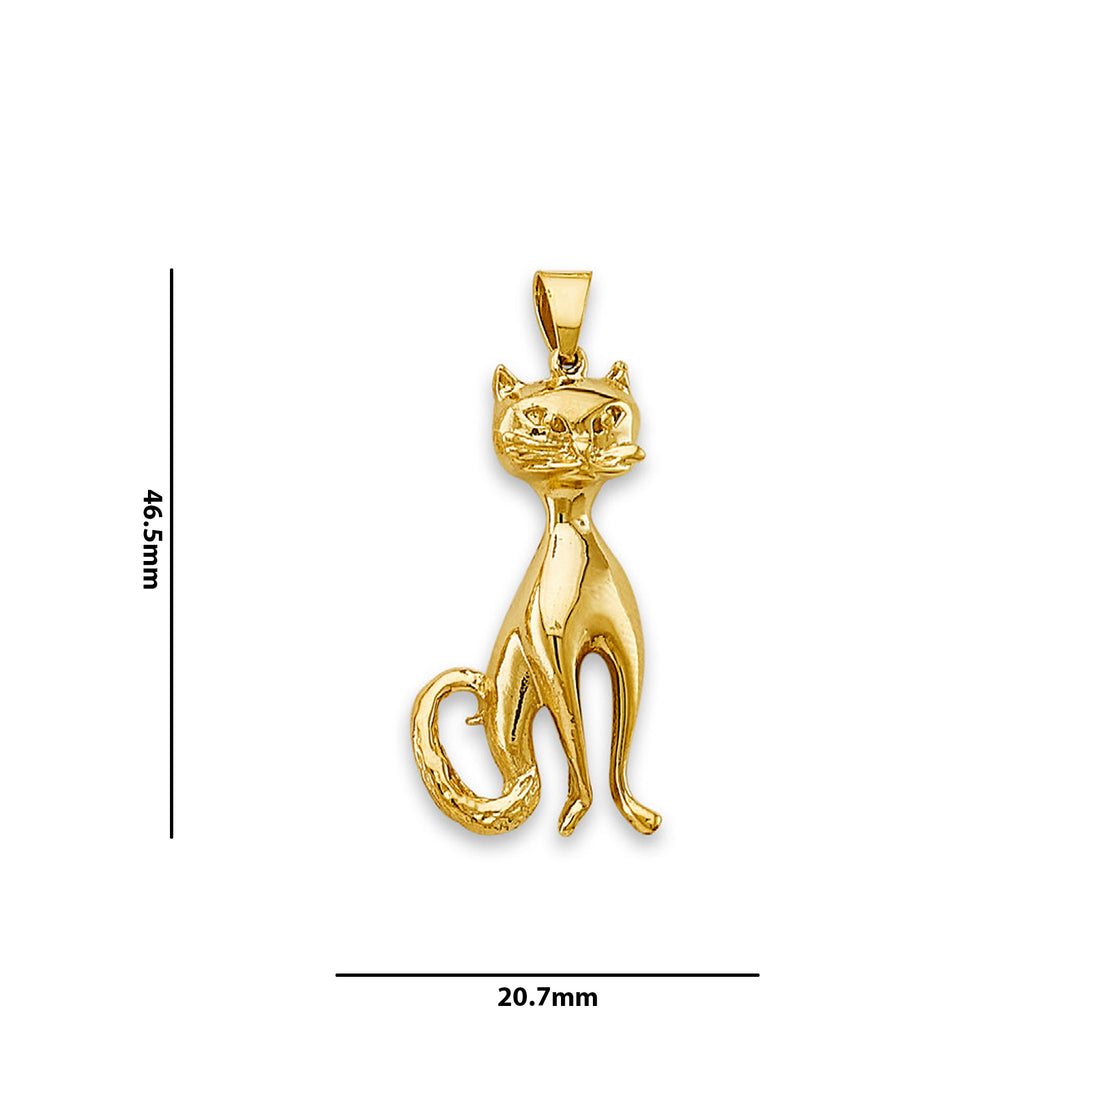 Yellow Gold Vintage Inspired Cat Pendant with Measurement